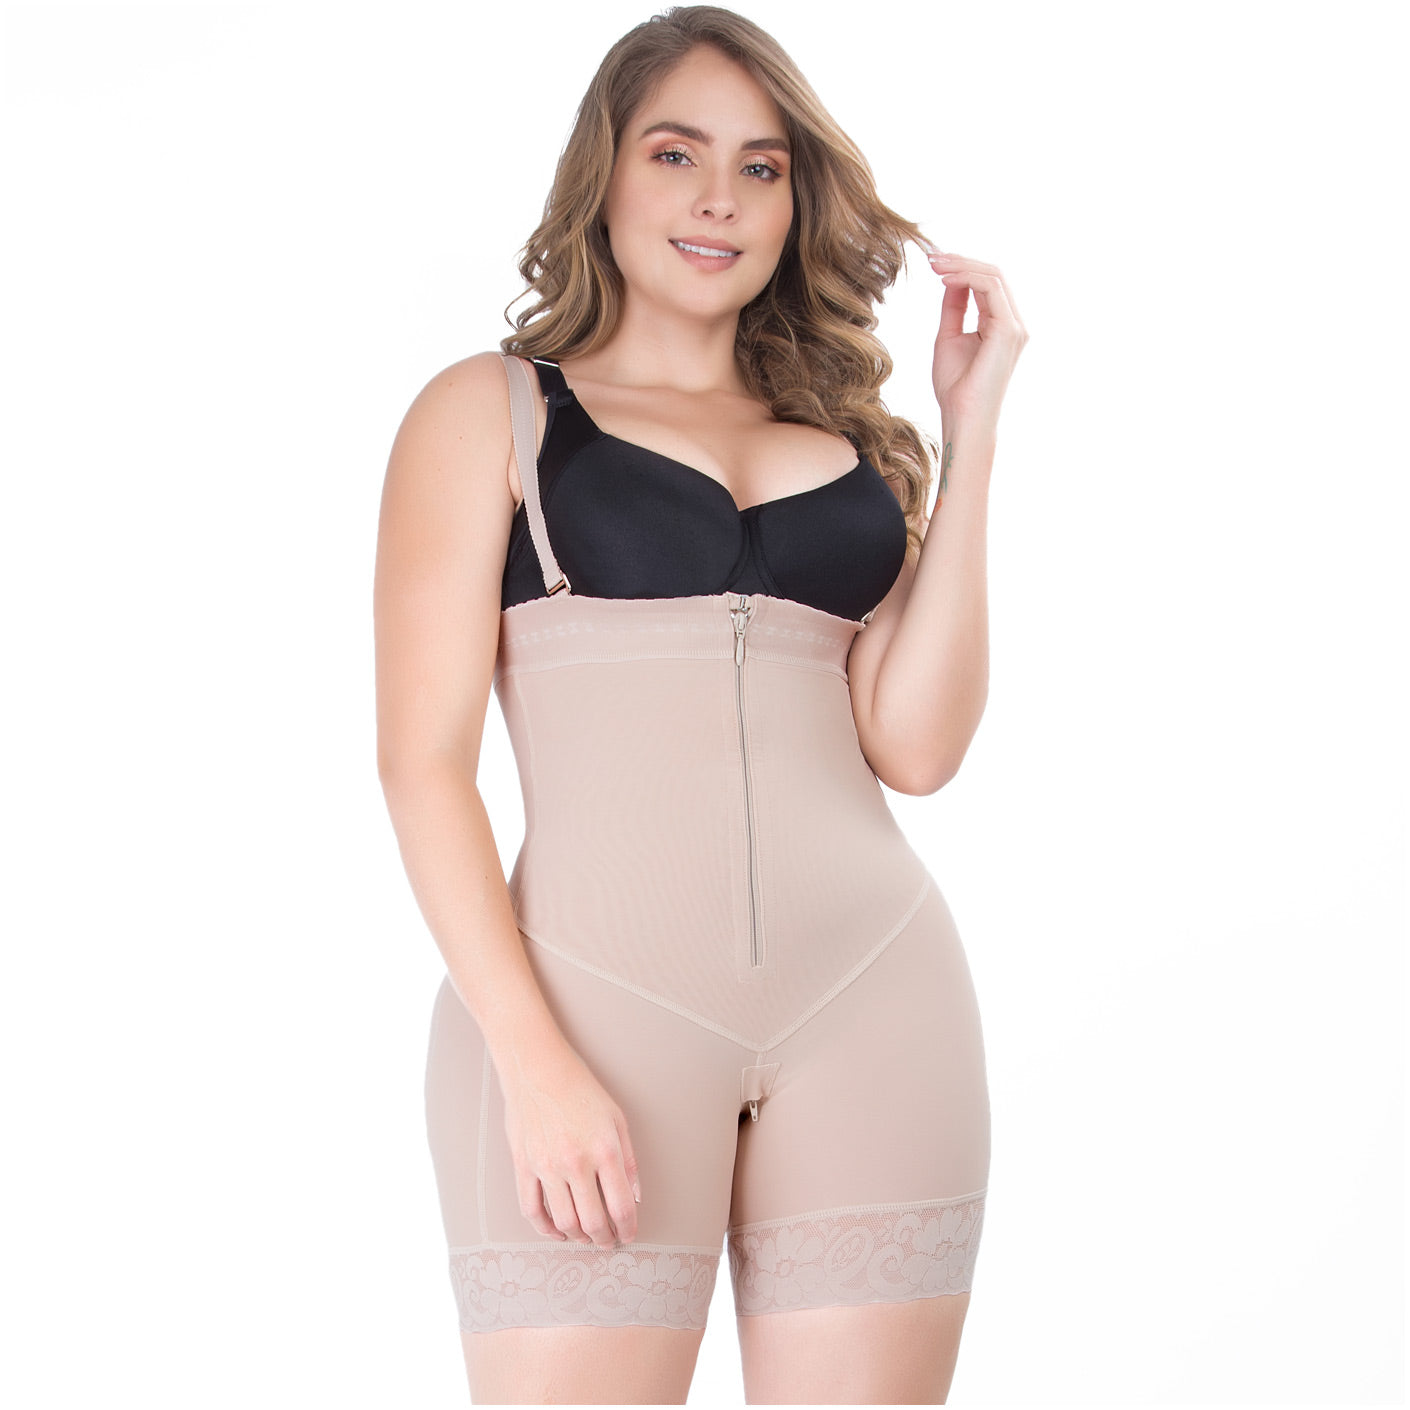 UpLady 6184 | Butt Lifting Shapewear Bodysuit with Wide Hips